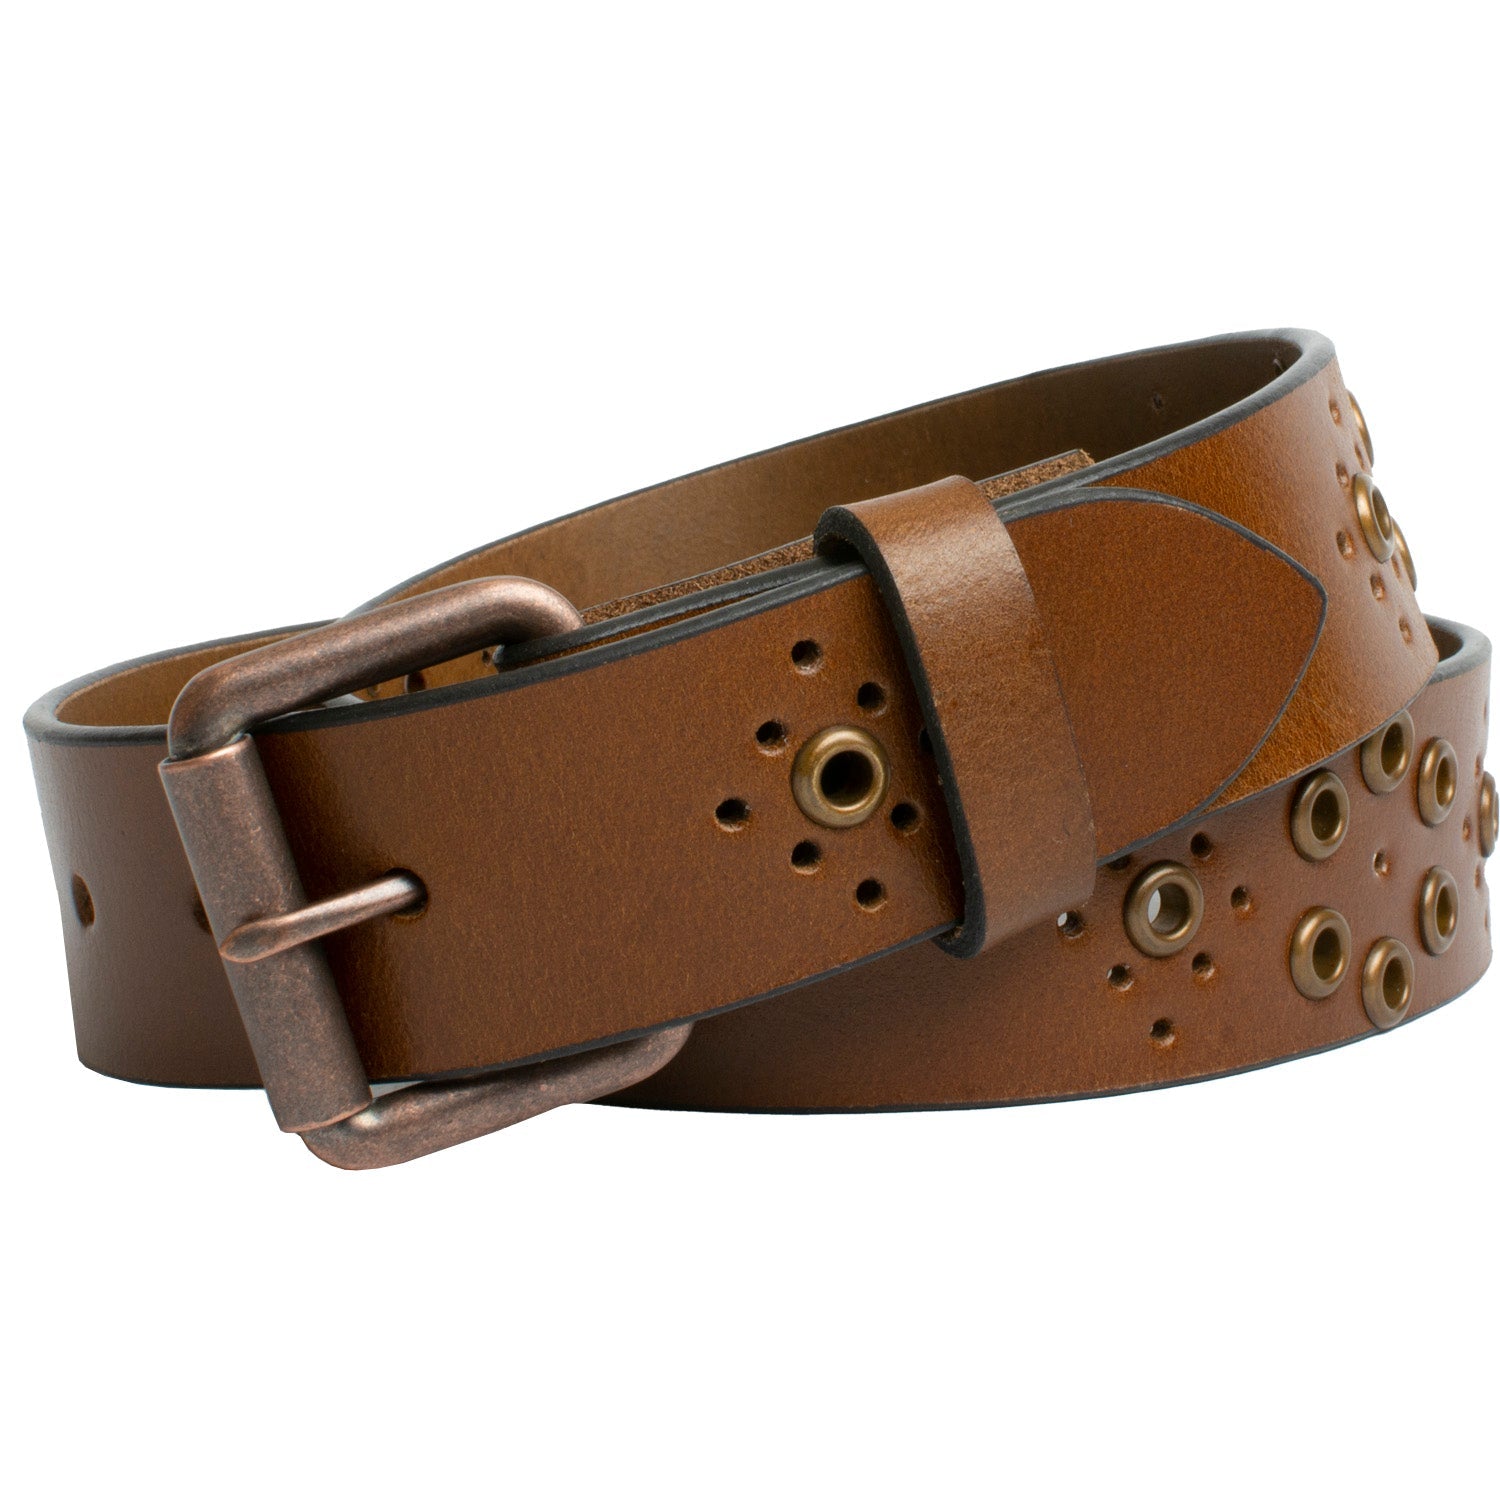 Nickel Free Women's Belts -- Ashe and Avery Belt Set 44 inch / Black and Brown / Zinc Alloy/Leather